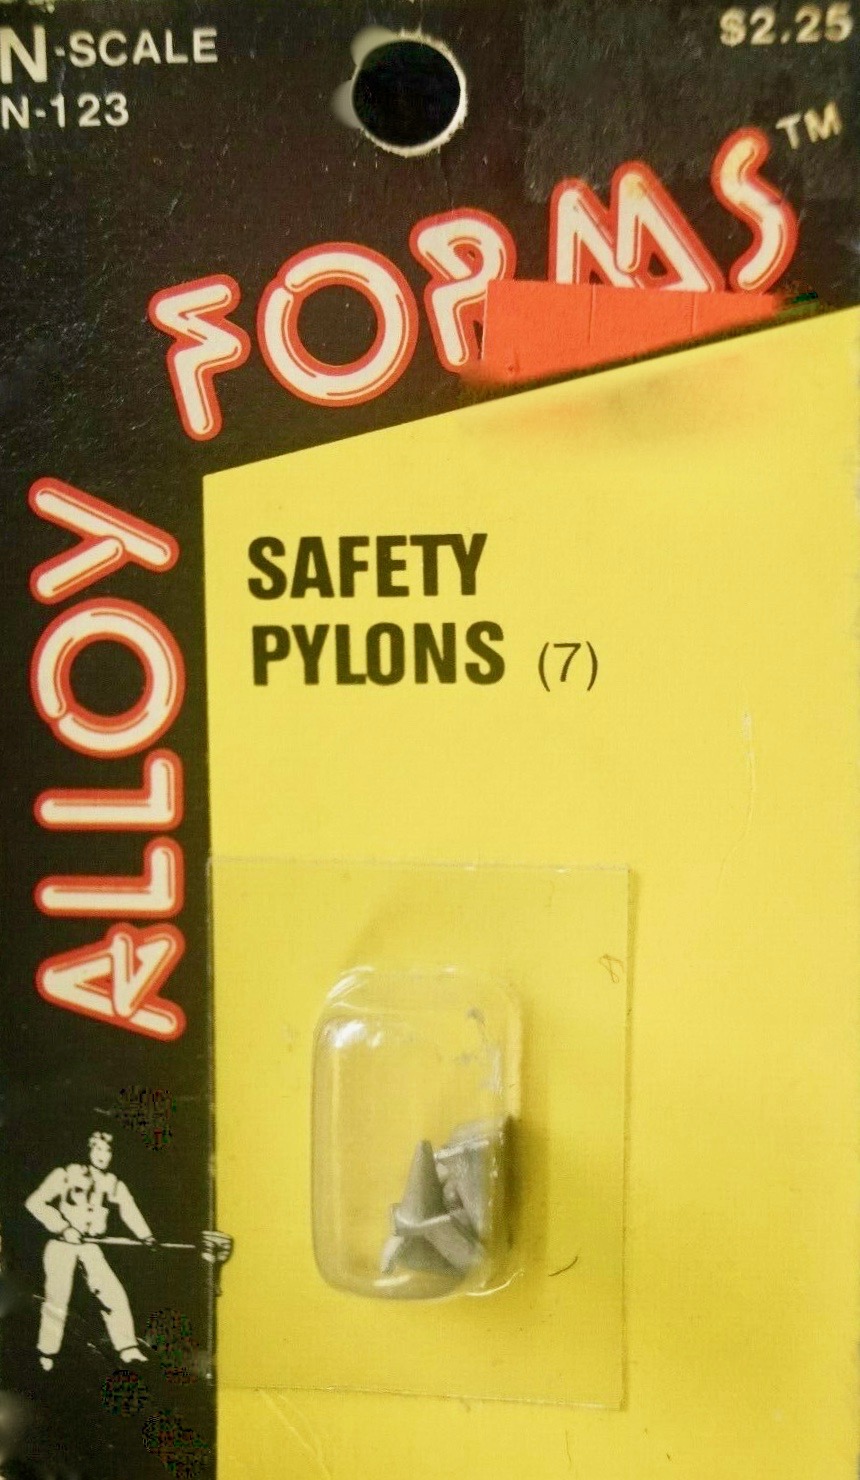 N Scale - Alloy Forms - N-123 - Pylons - Undecorated